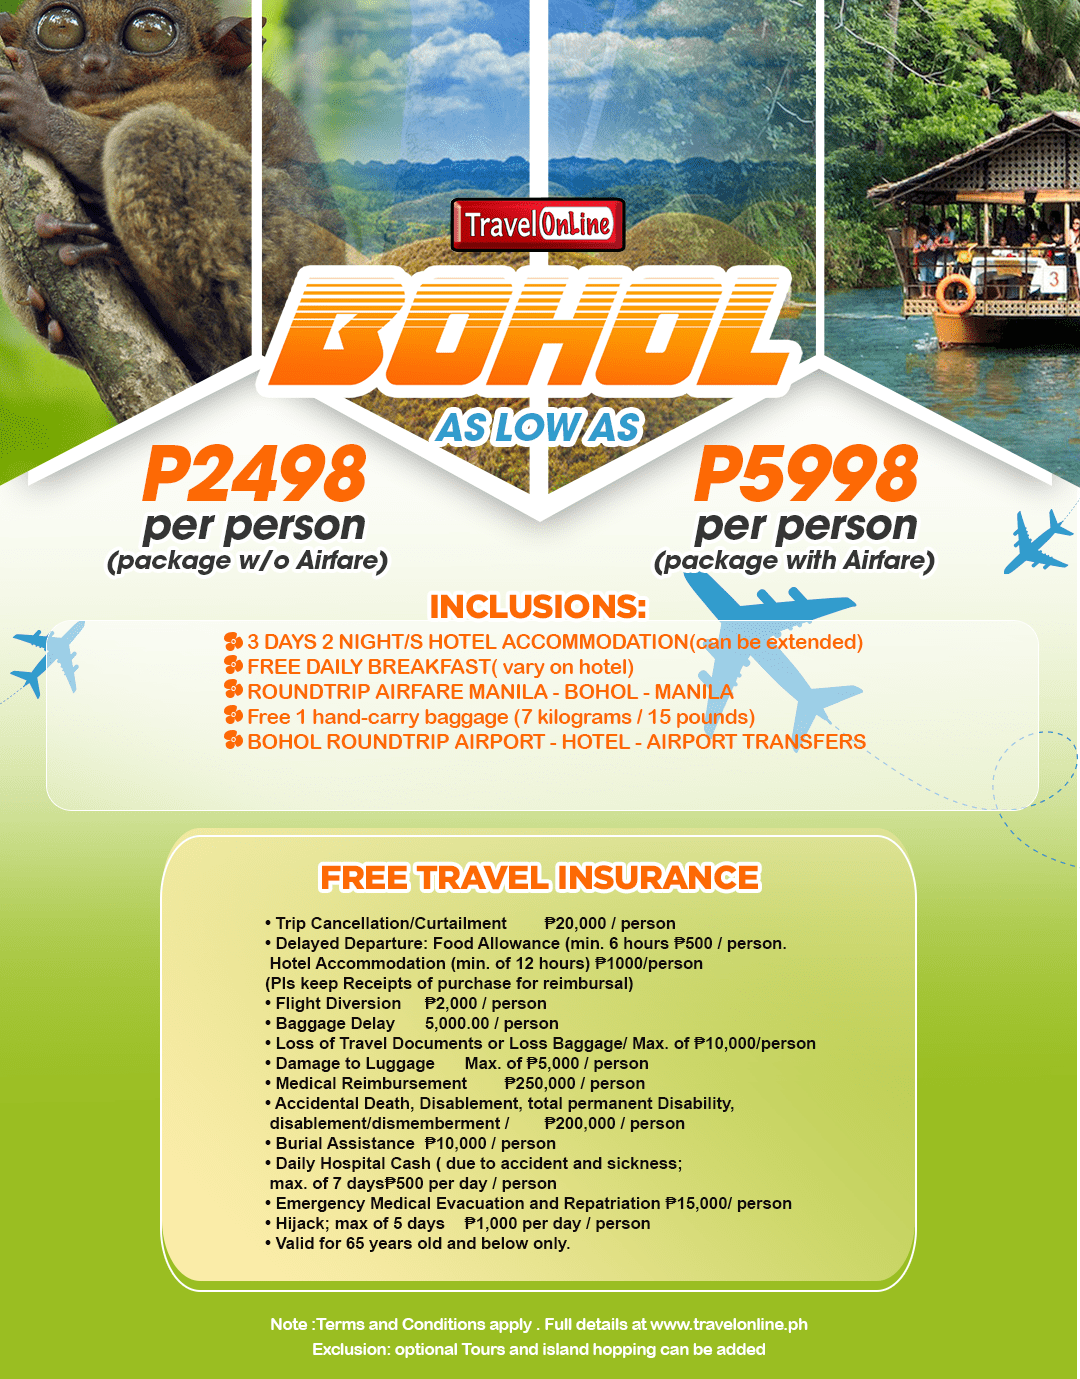 bohol tour package agency